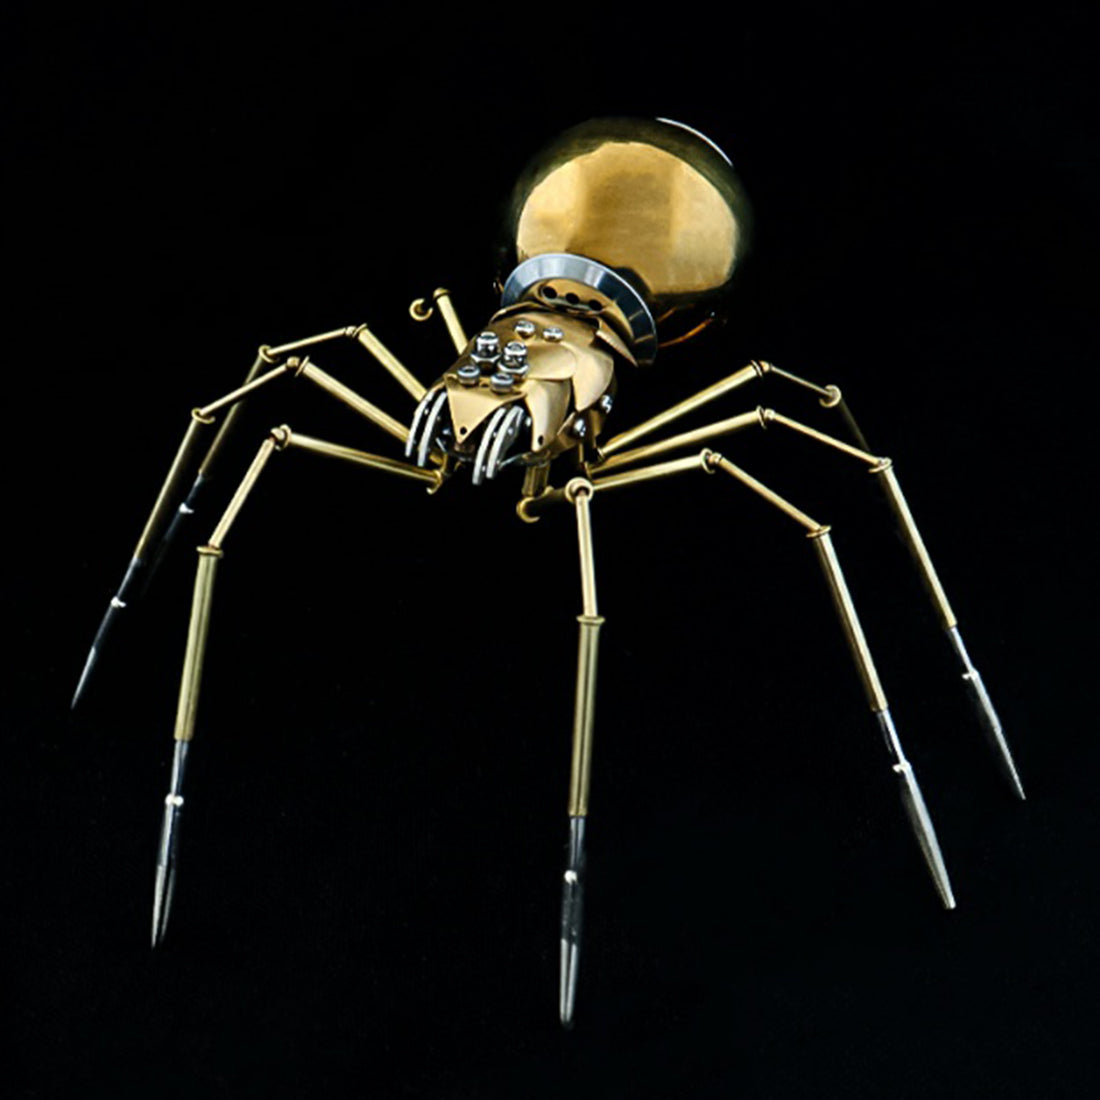 Brass Metal Spider Insect Model Assembled Crafts for Home Collection